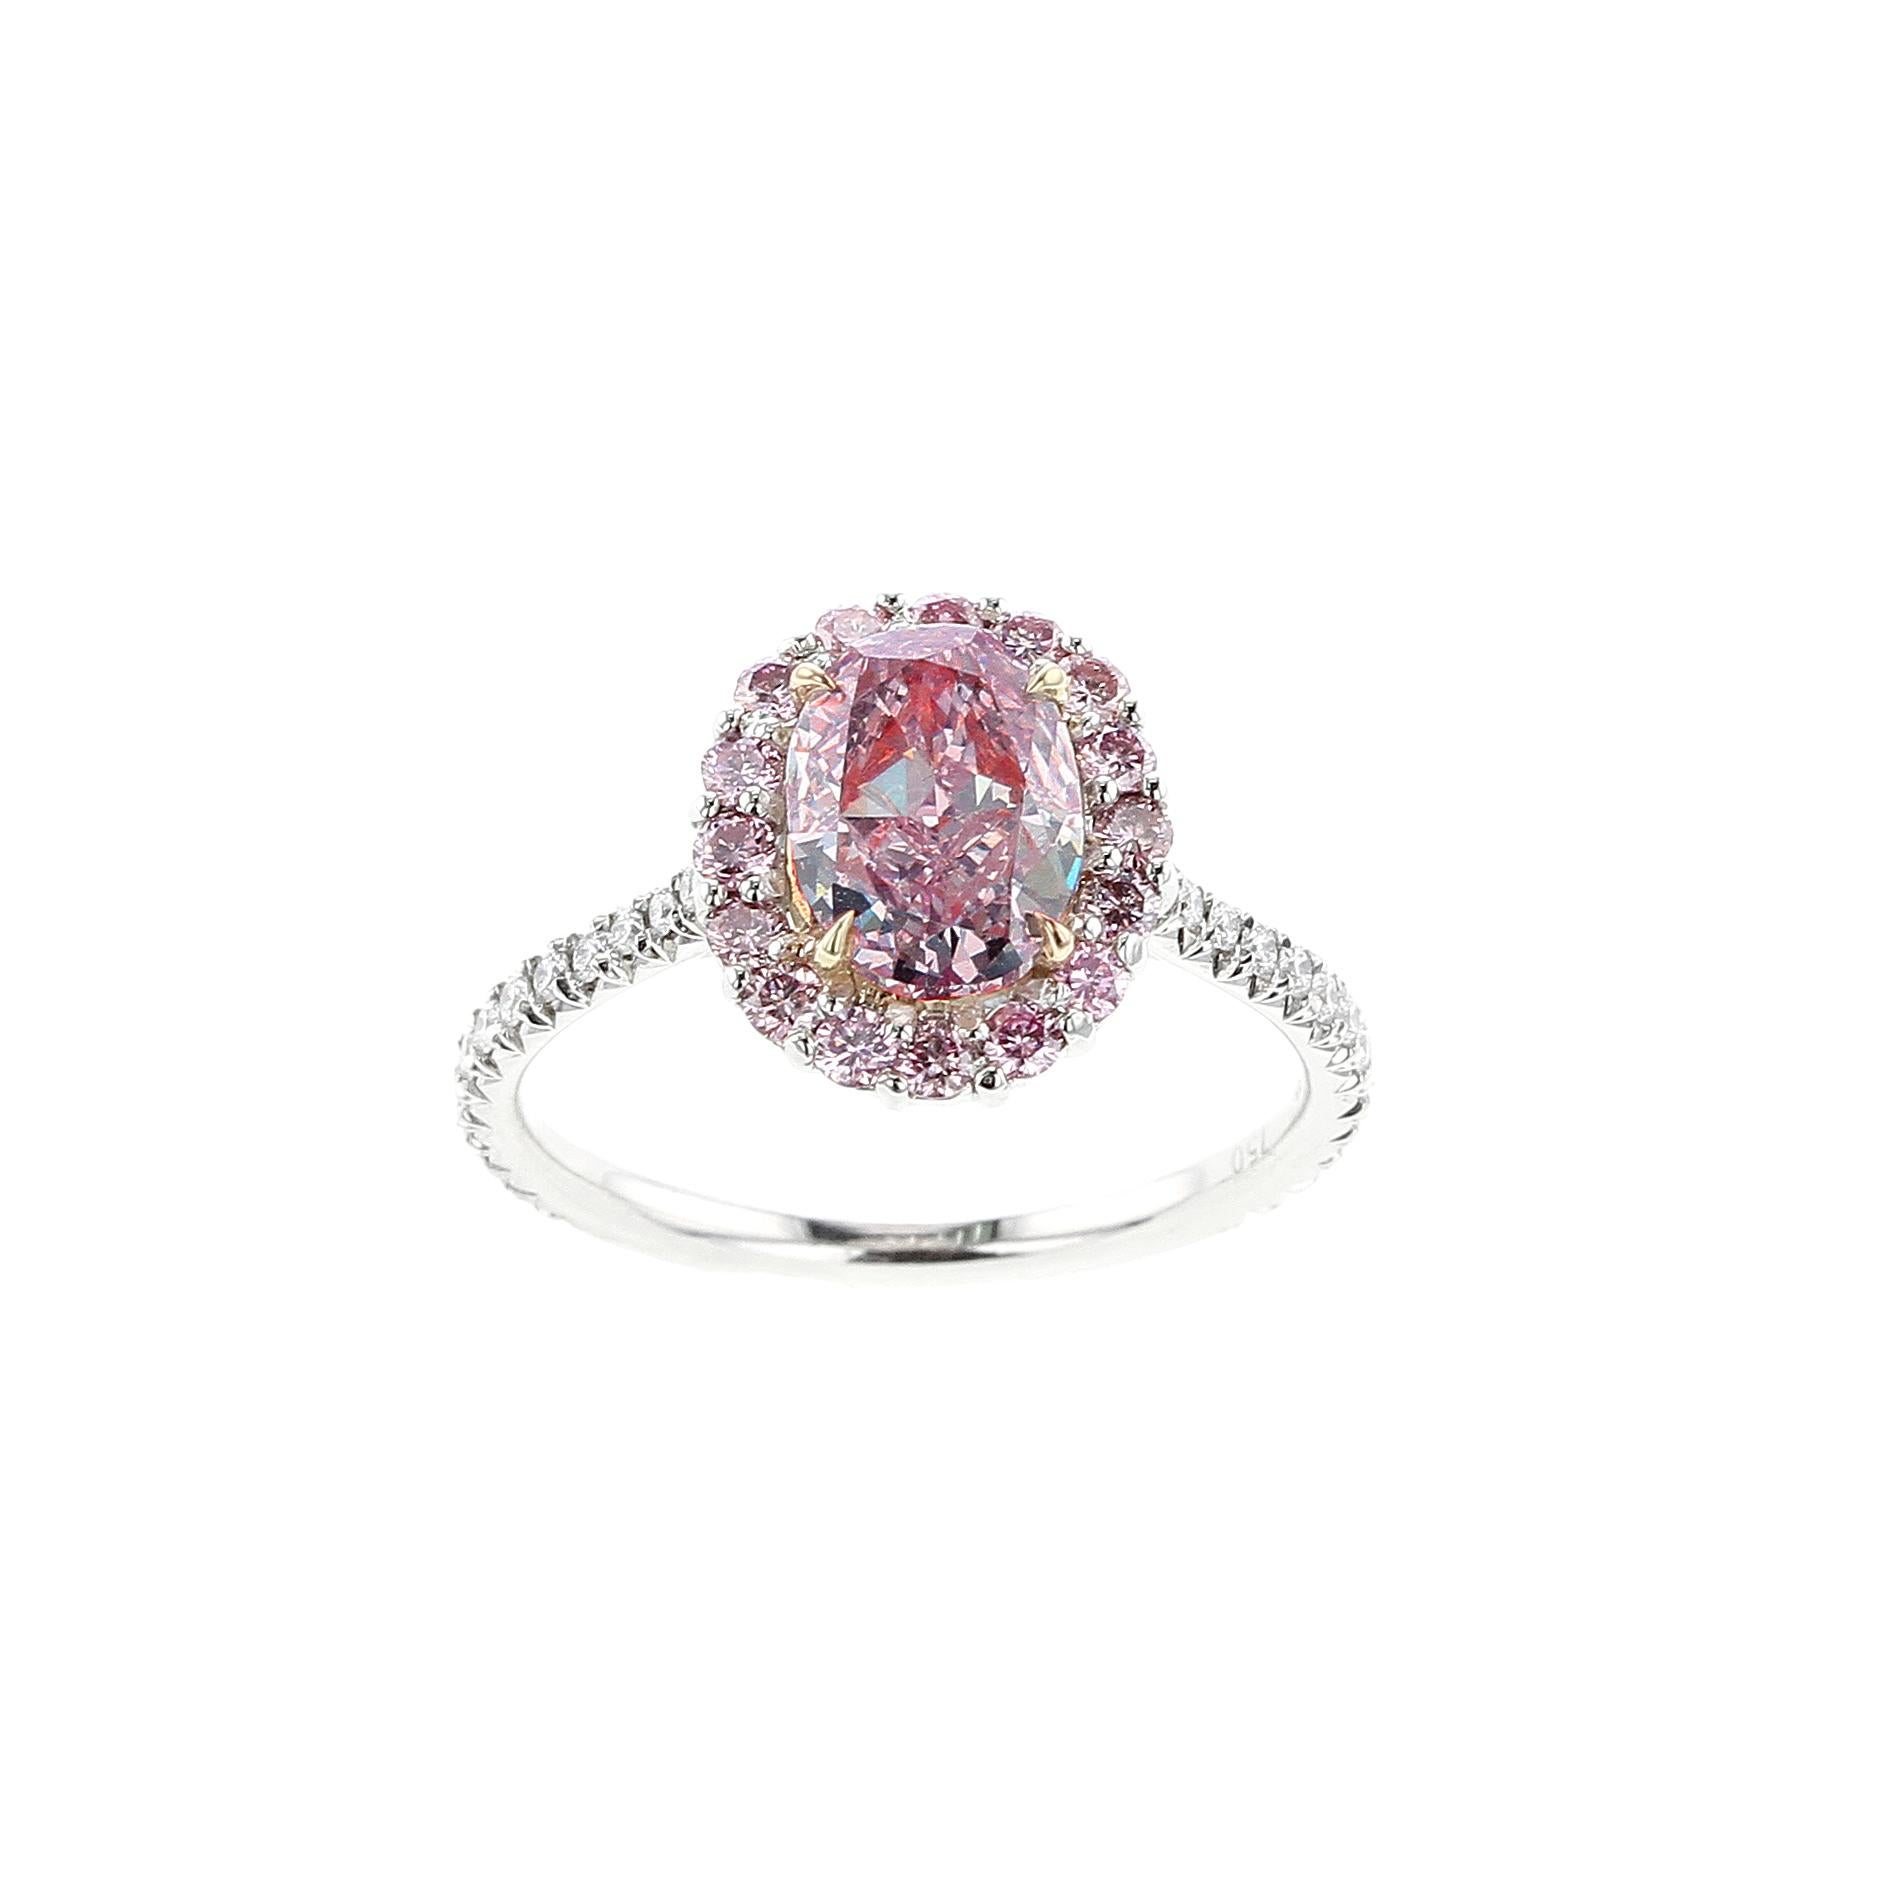 A beautiful and elegant ring centered with a natural oval-shape, Fancy Purplish Pink diamond, accented with a cluster of round brilliant-cut pink diamonds, with white round brilliant-cut diamonds along the shank. The center stone accompanies a